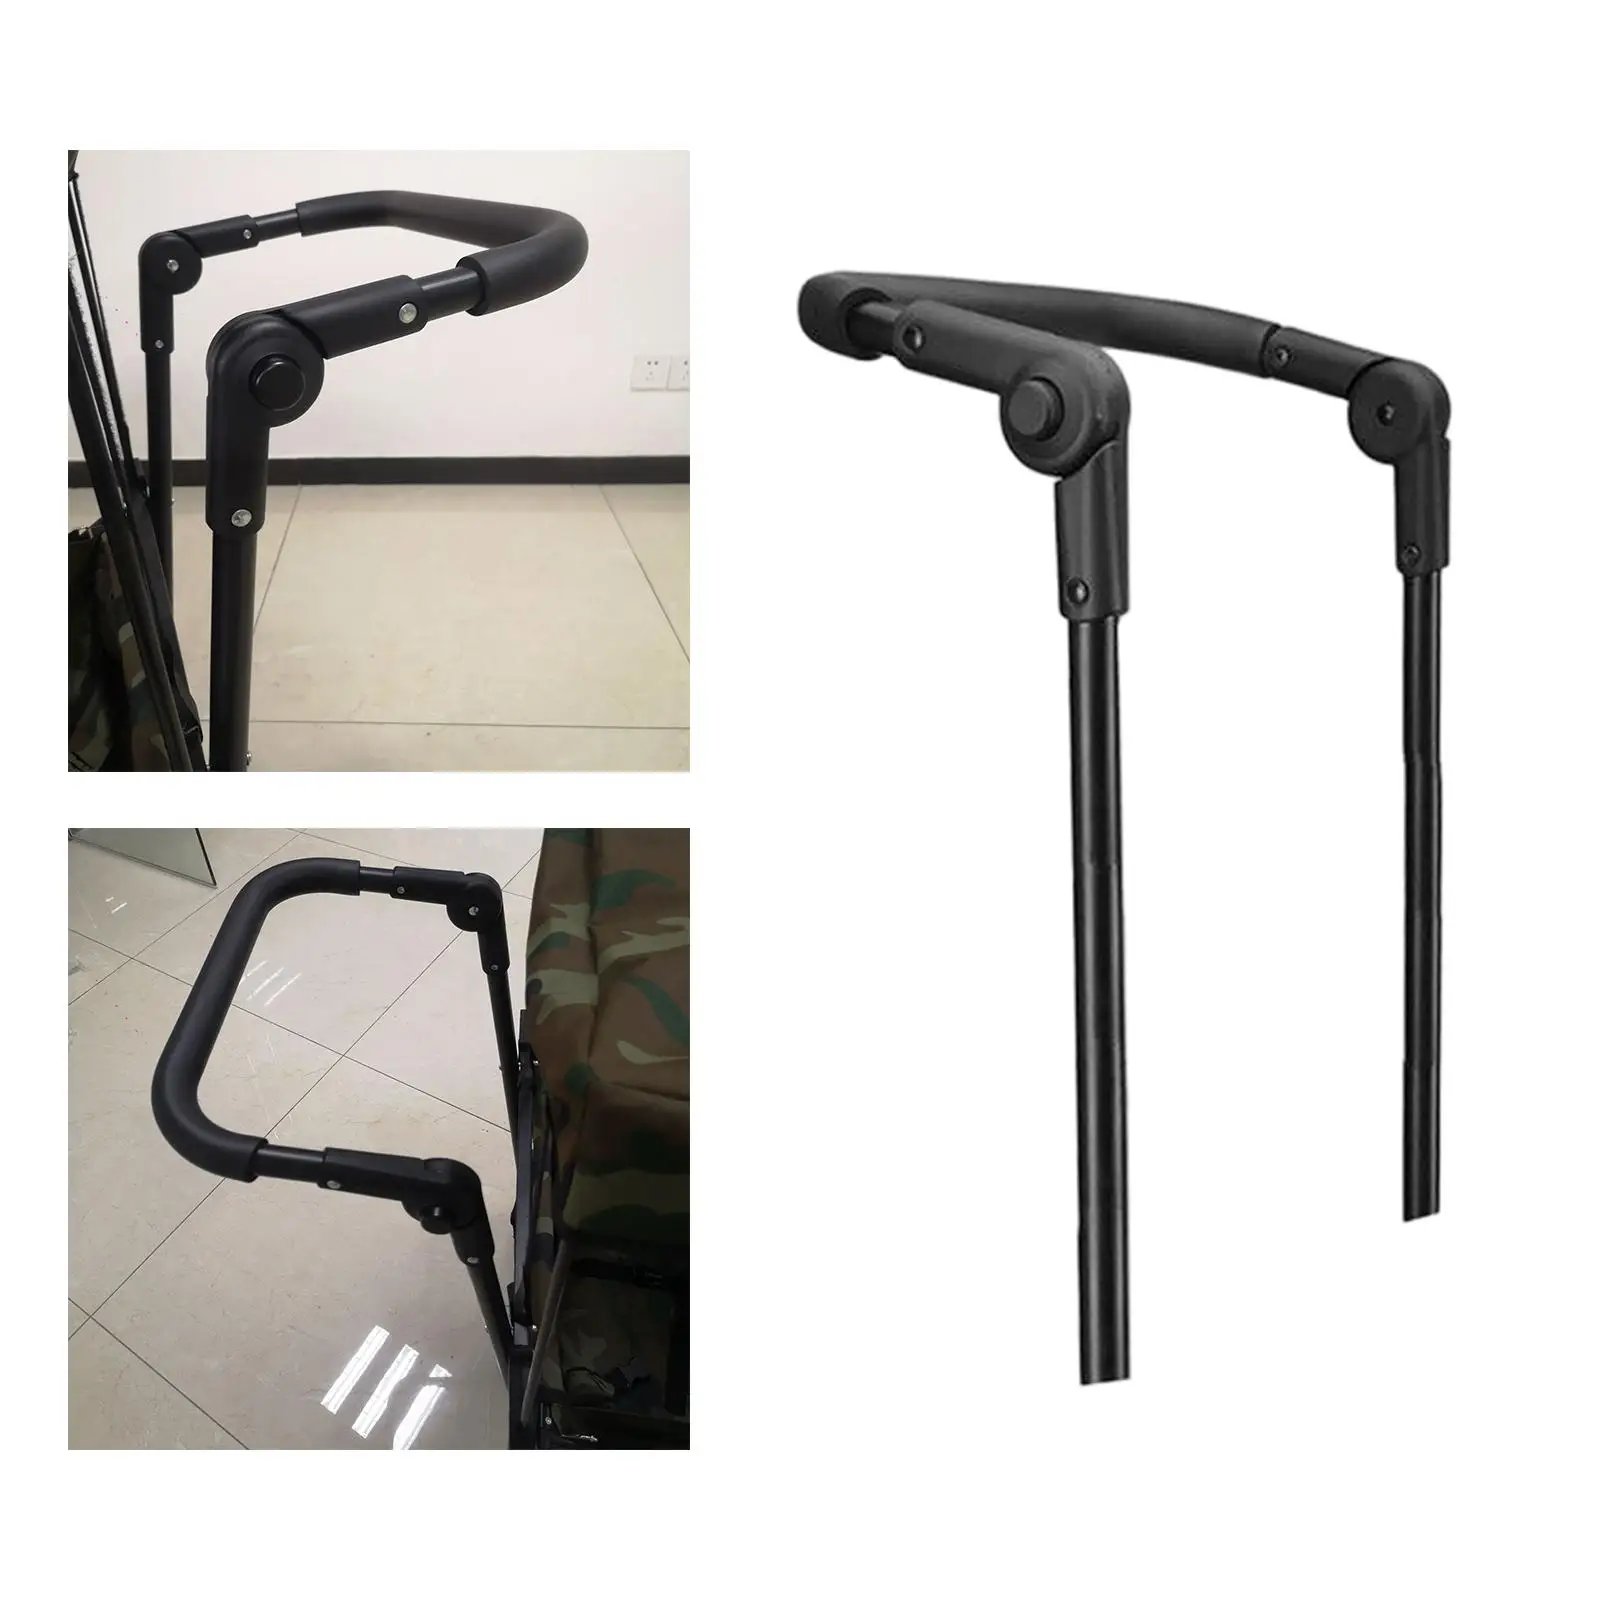 Folding Push Handle Attachment Adjustable Utility Holder for